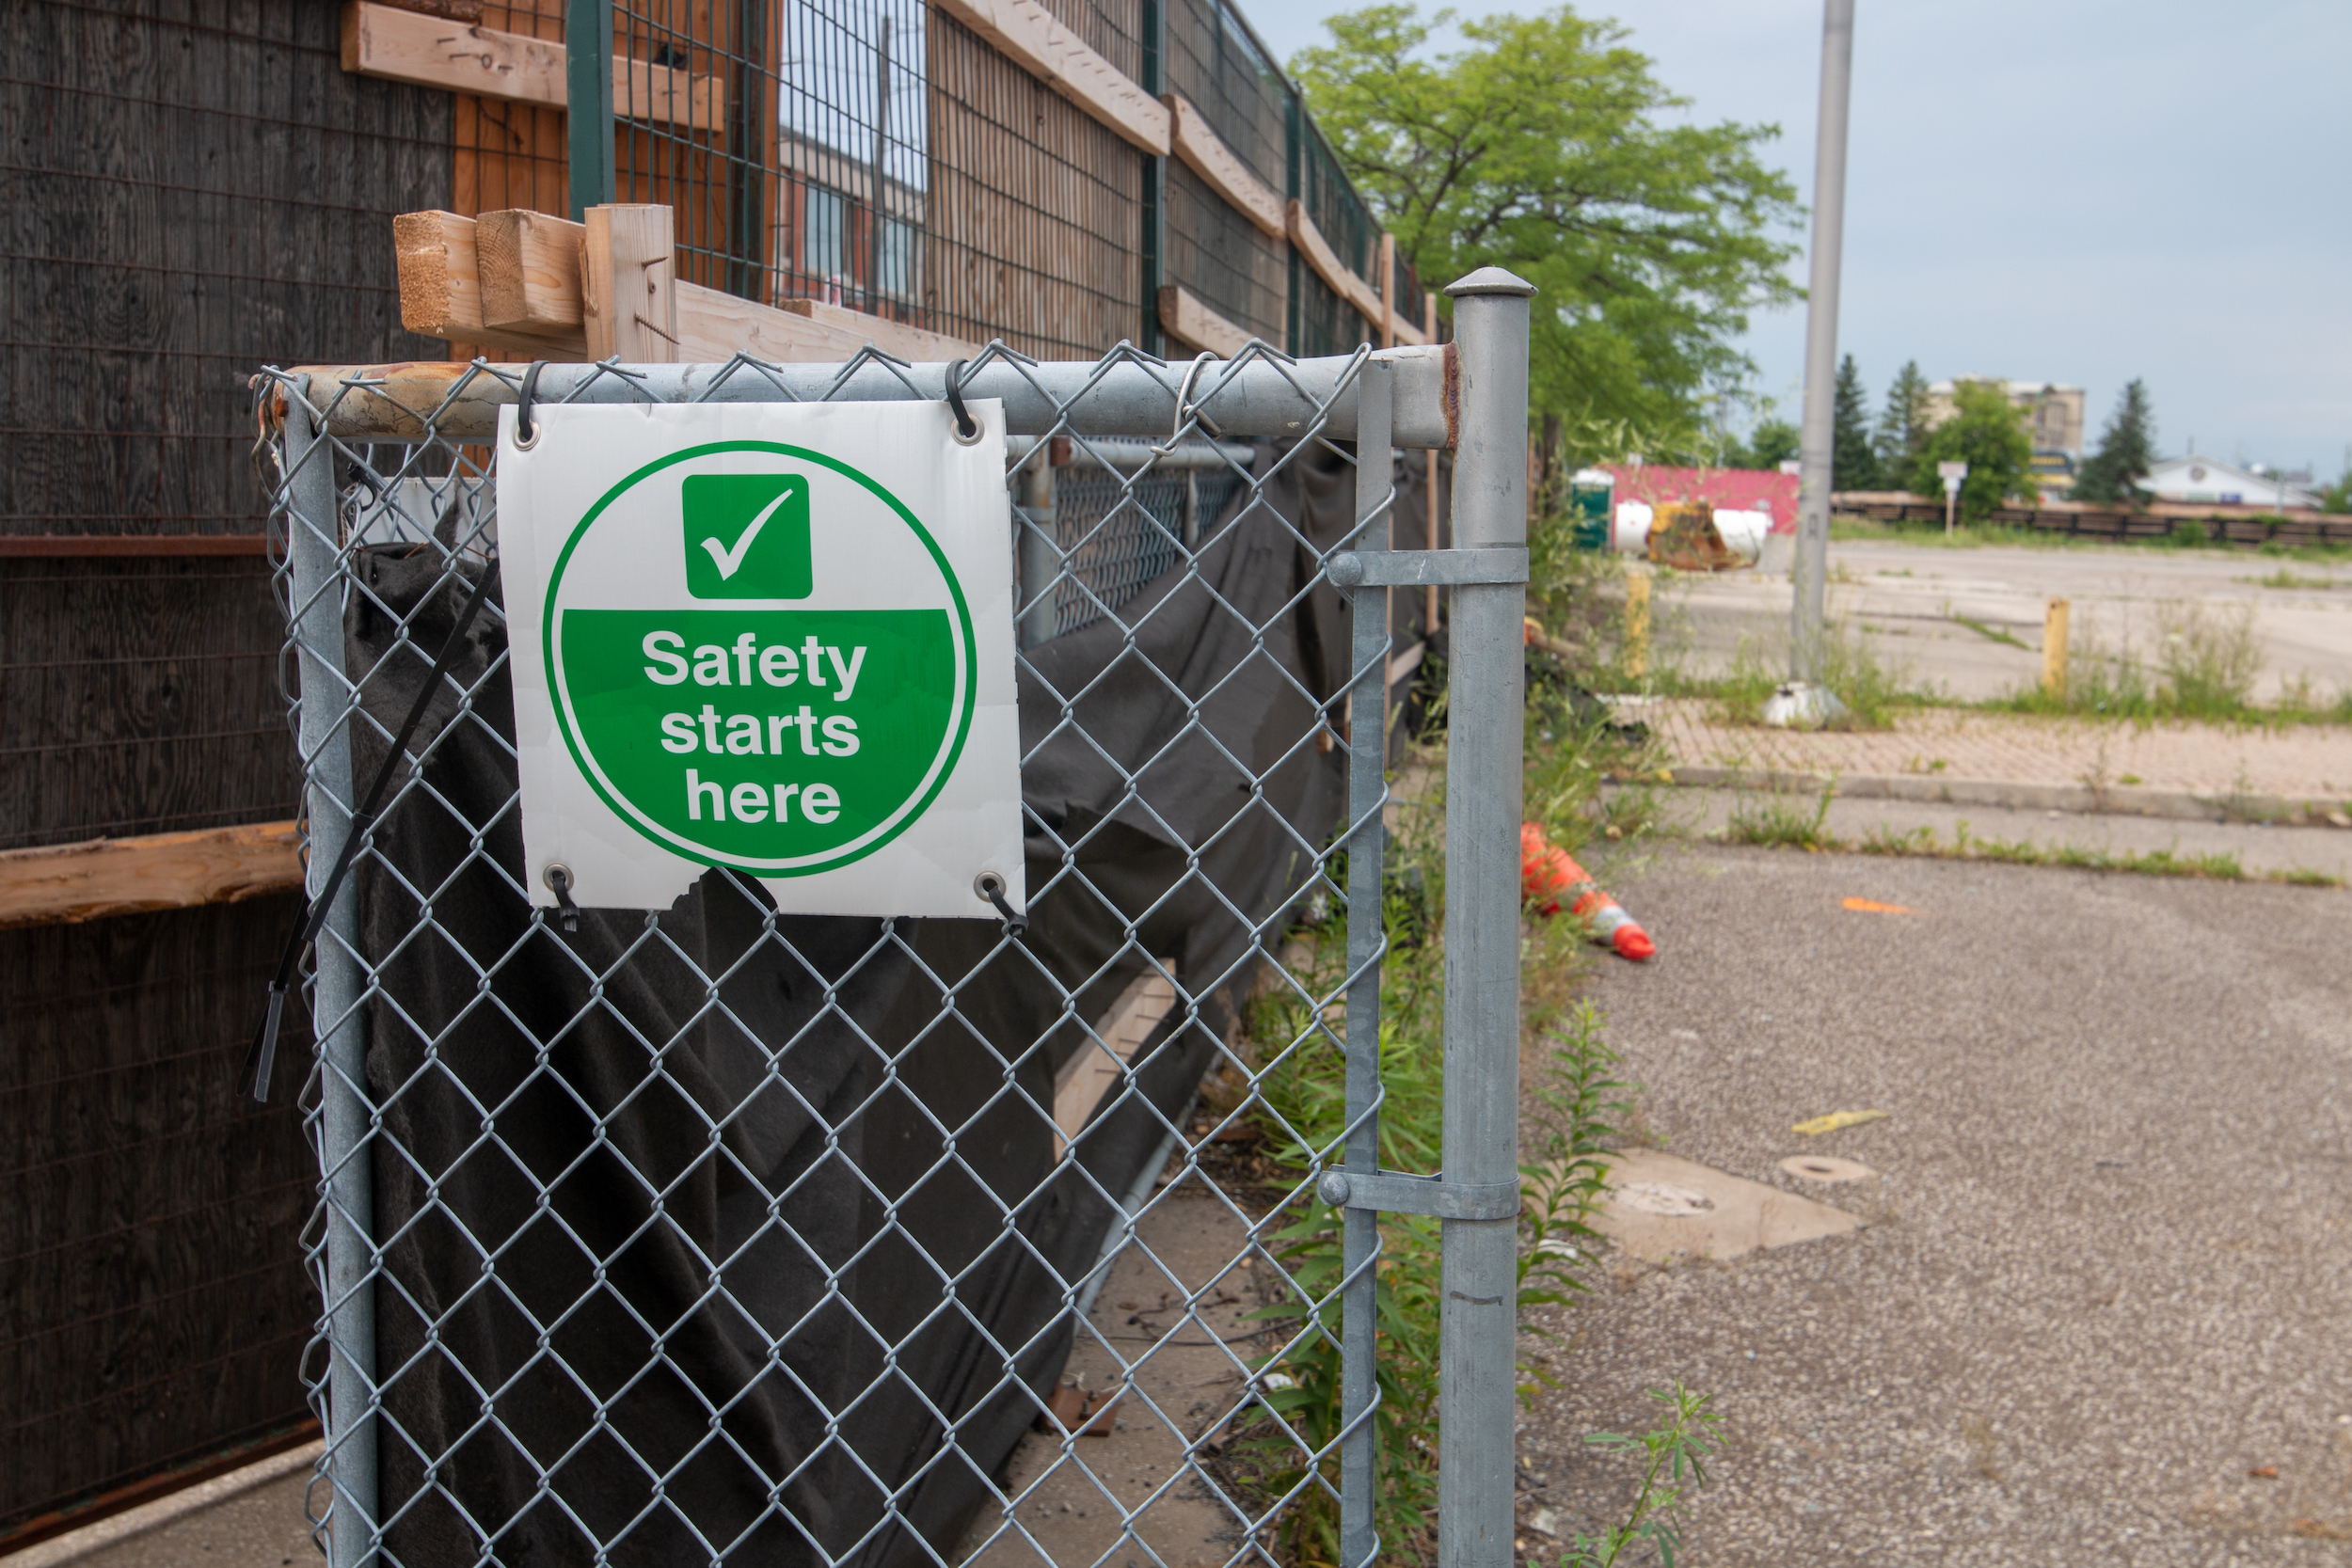 A derelict former General Motors site in St. Catharines, Ont. Photo: Ramona Leitao / The Narwhal